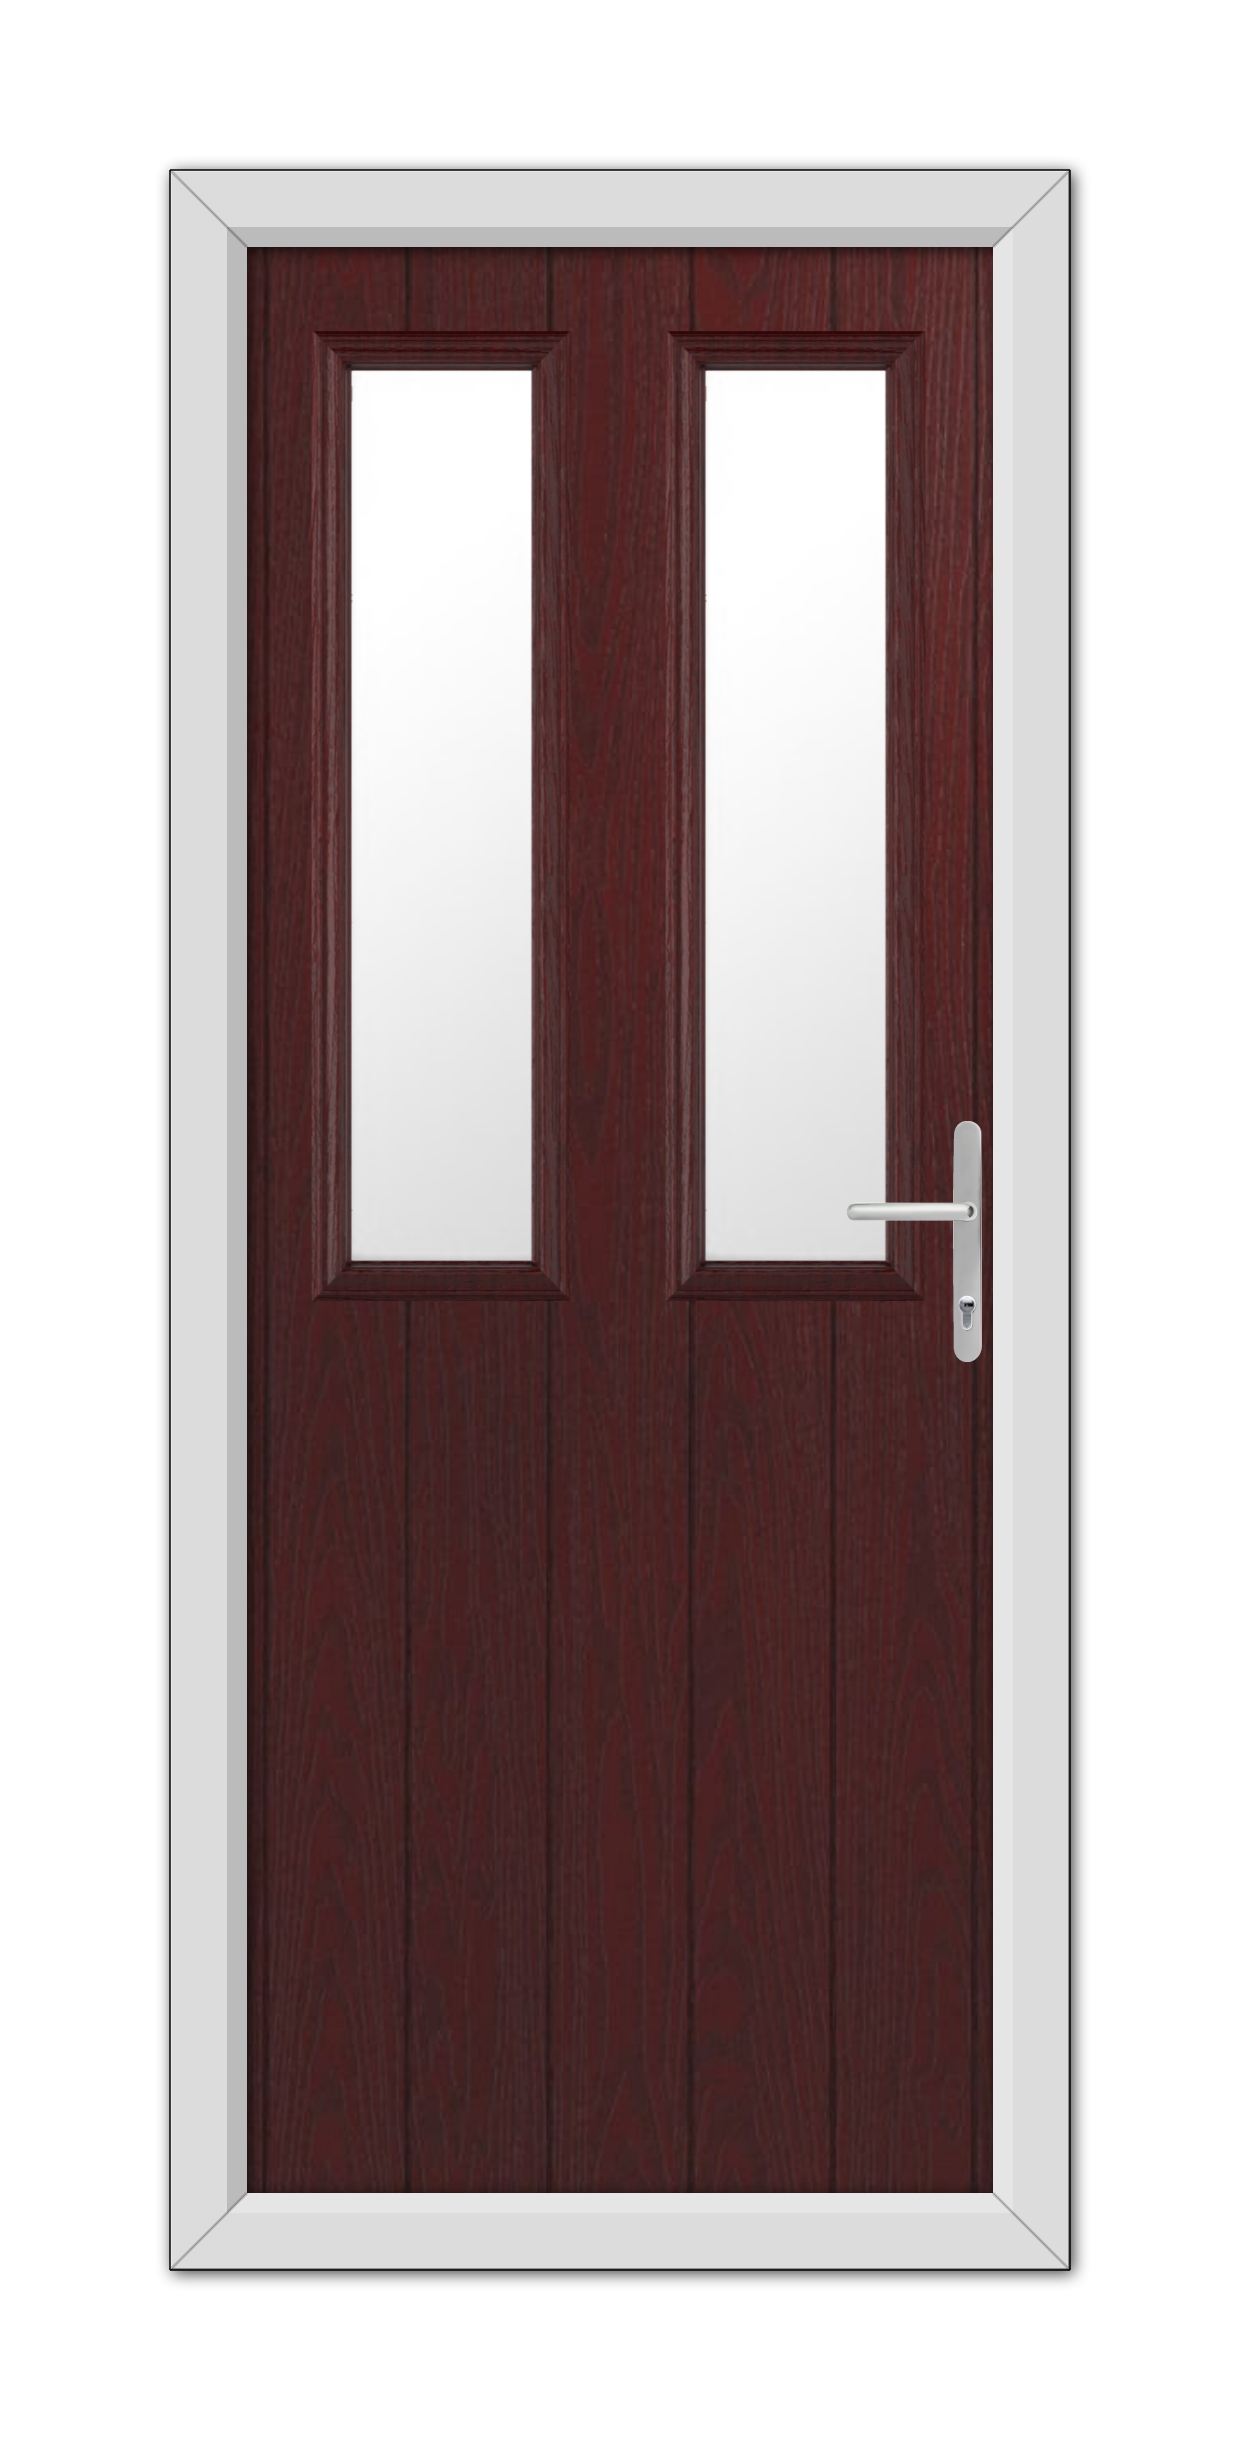 Rosewood Wellington Composite Door with white trim, featuring vertical rectangular windows and a modern handle, isolated on a white background.